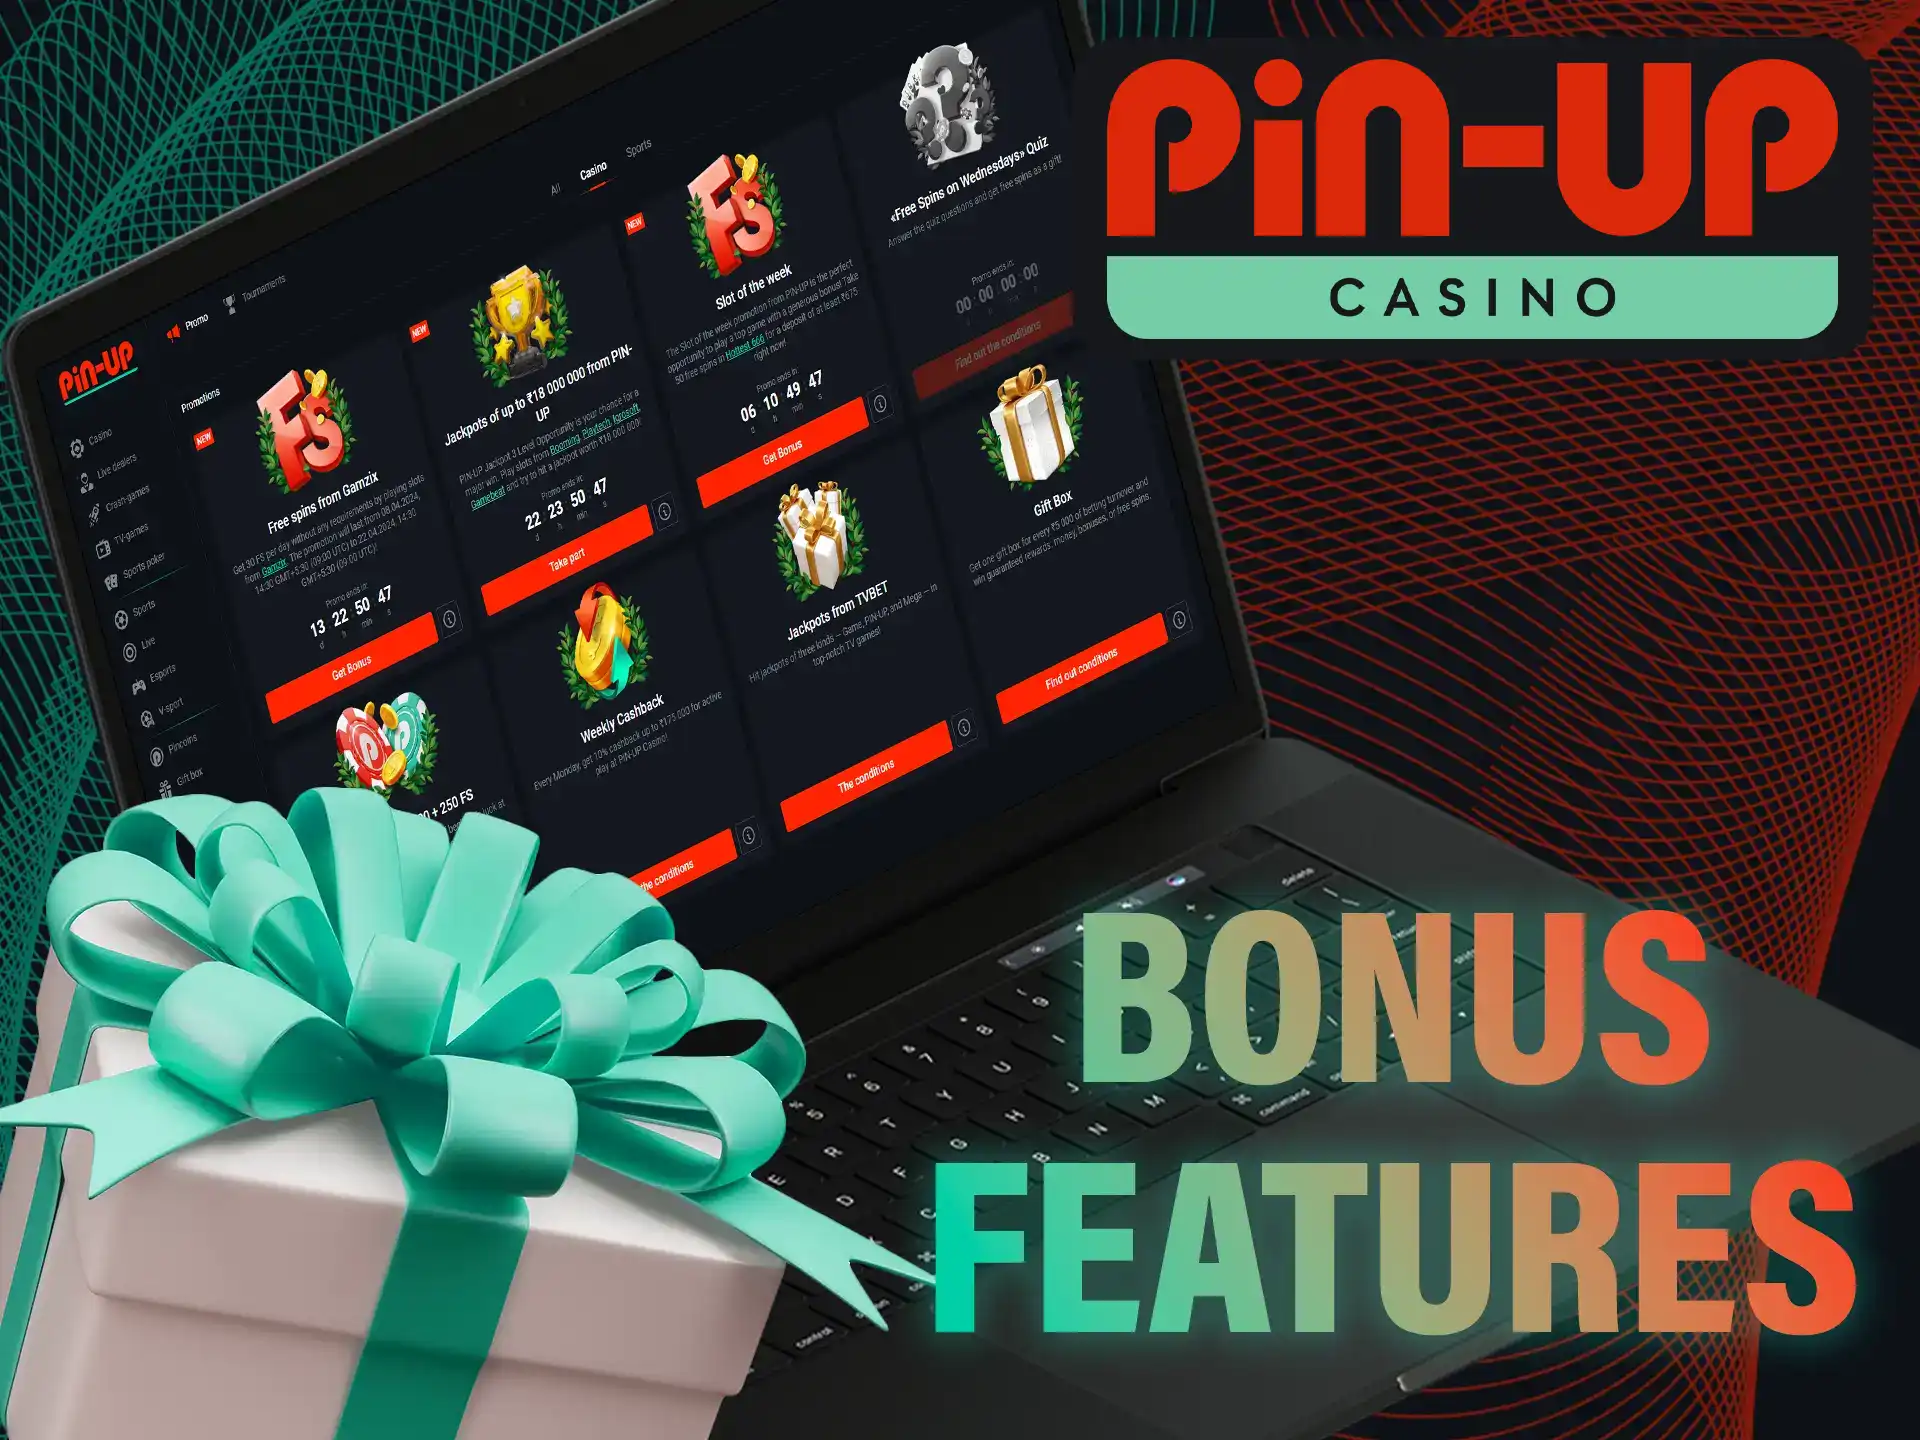 Pin-Up Casino often offers bonus features for slots!